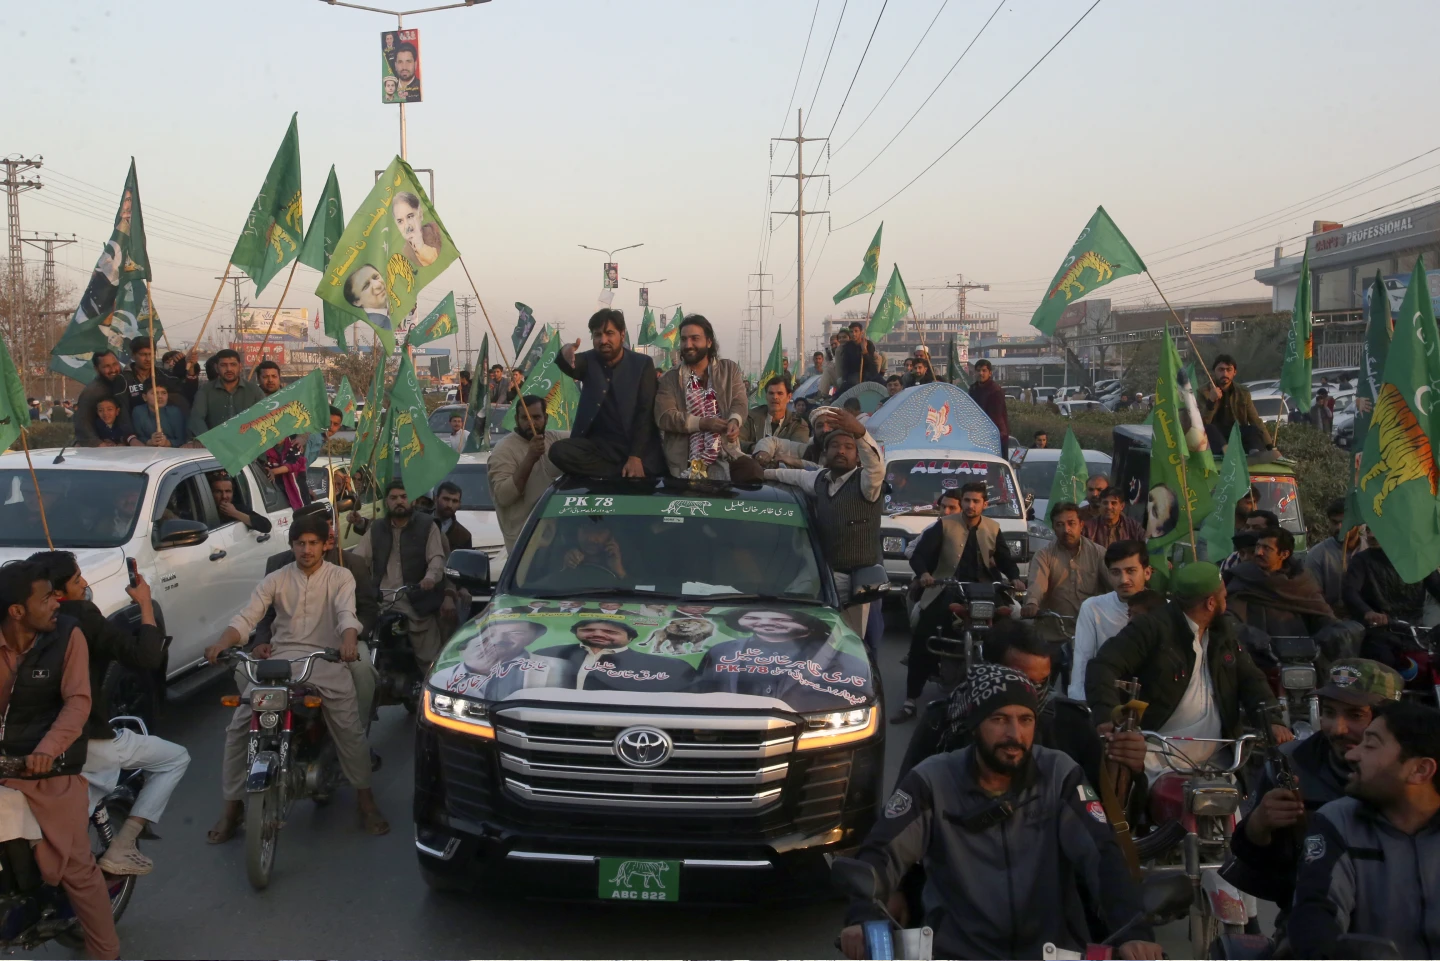 Pakistan’s election left no clear winner. So who is likely to govern and what happens next?